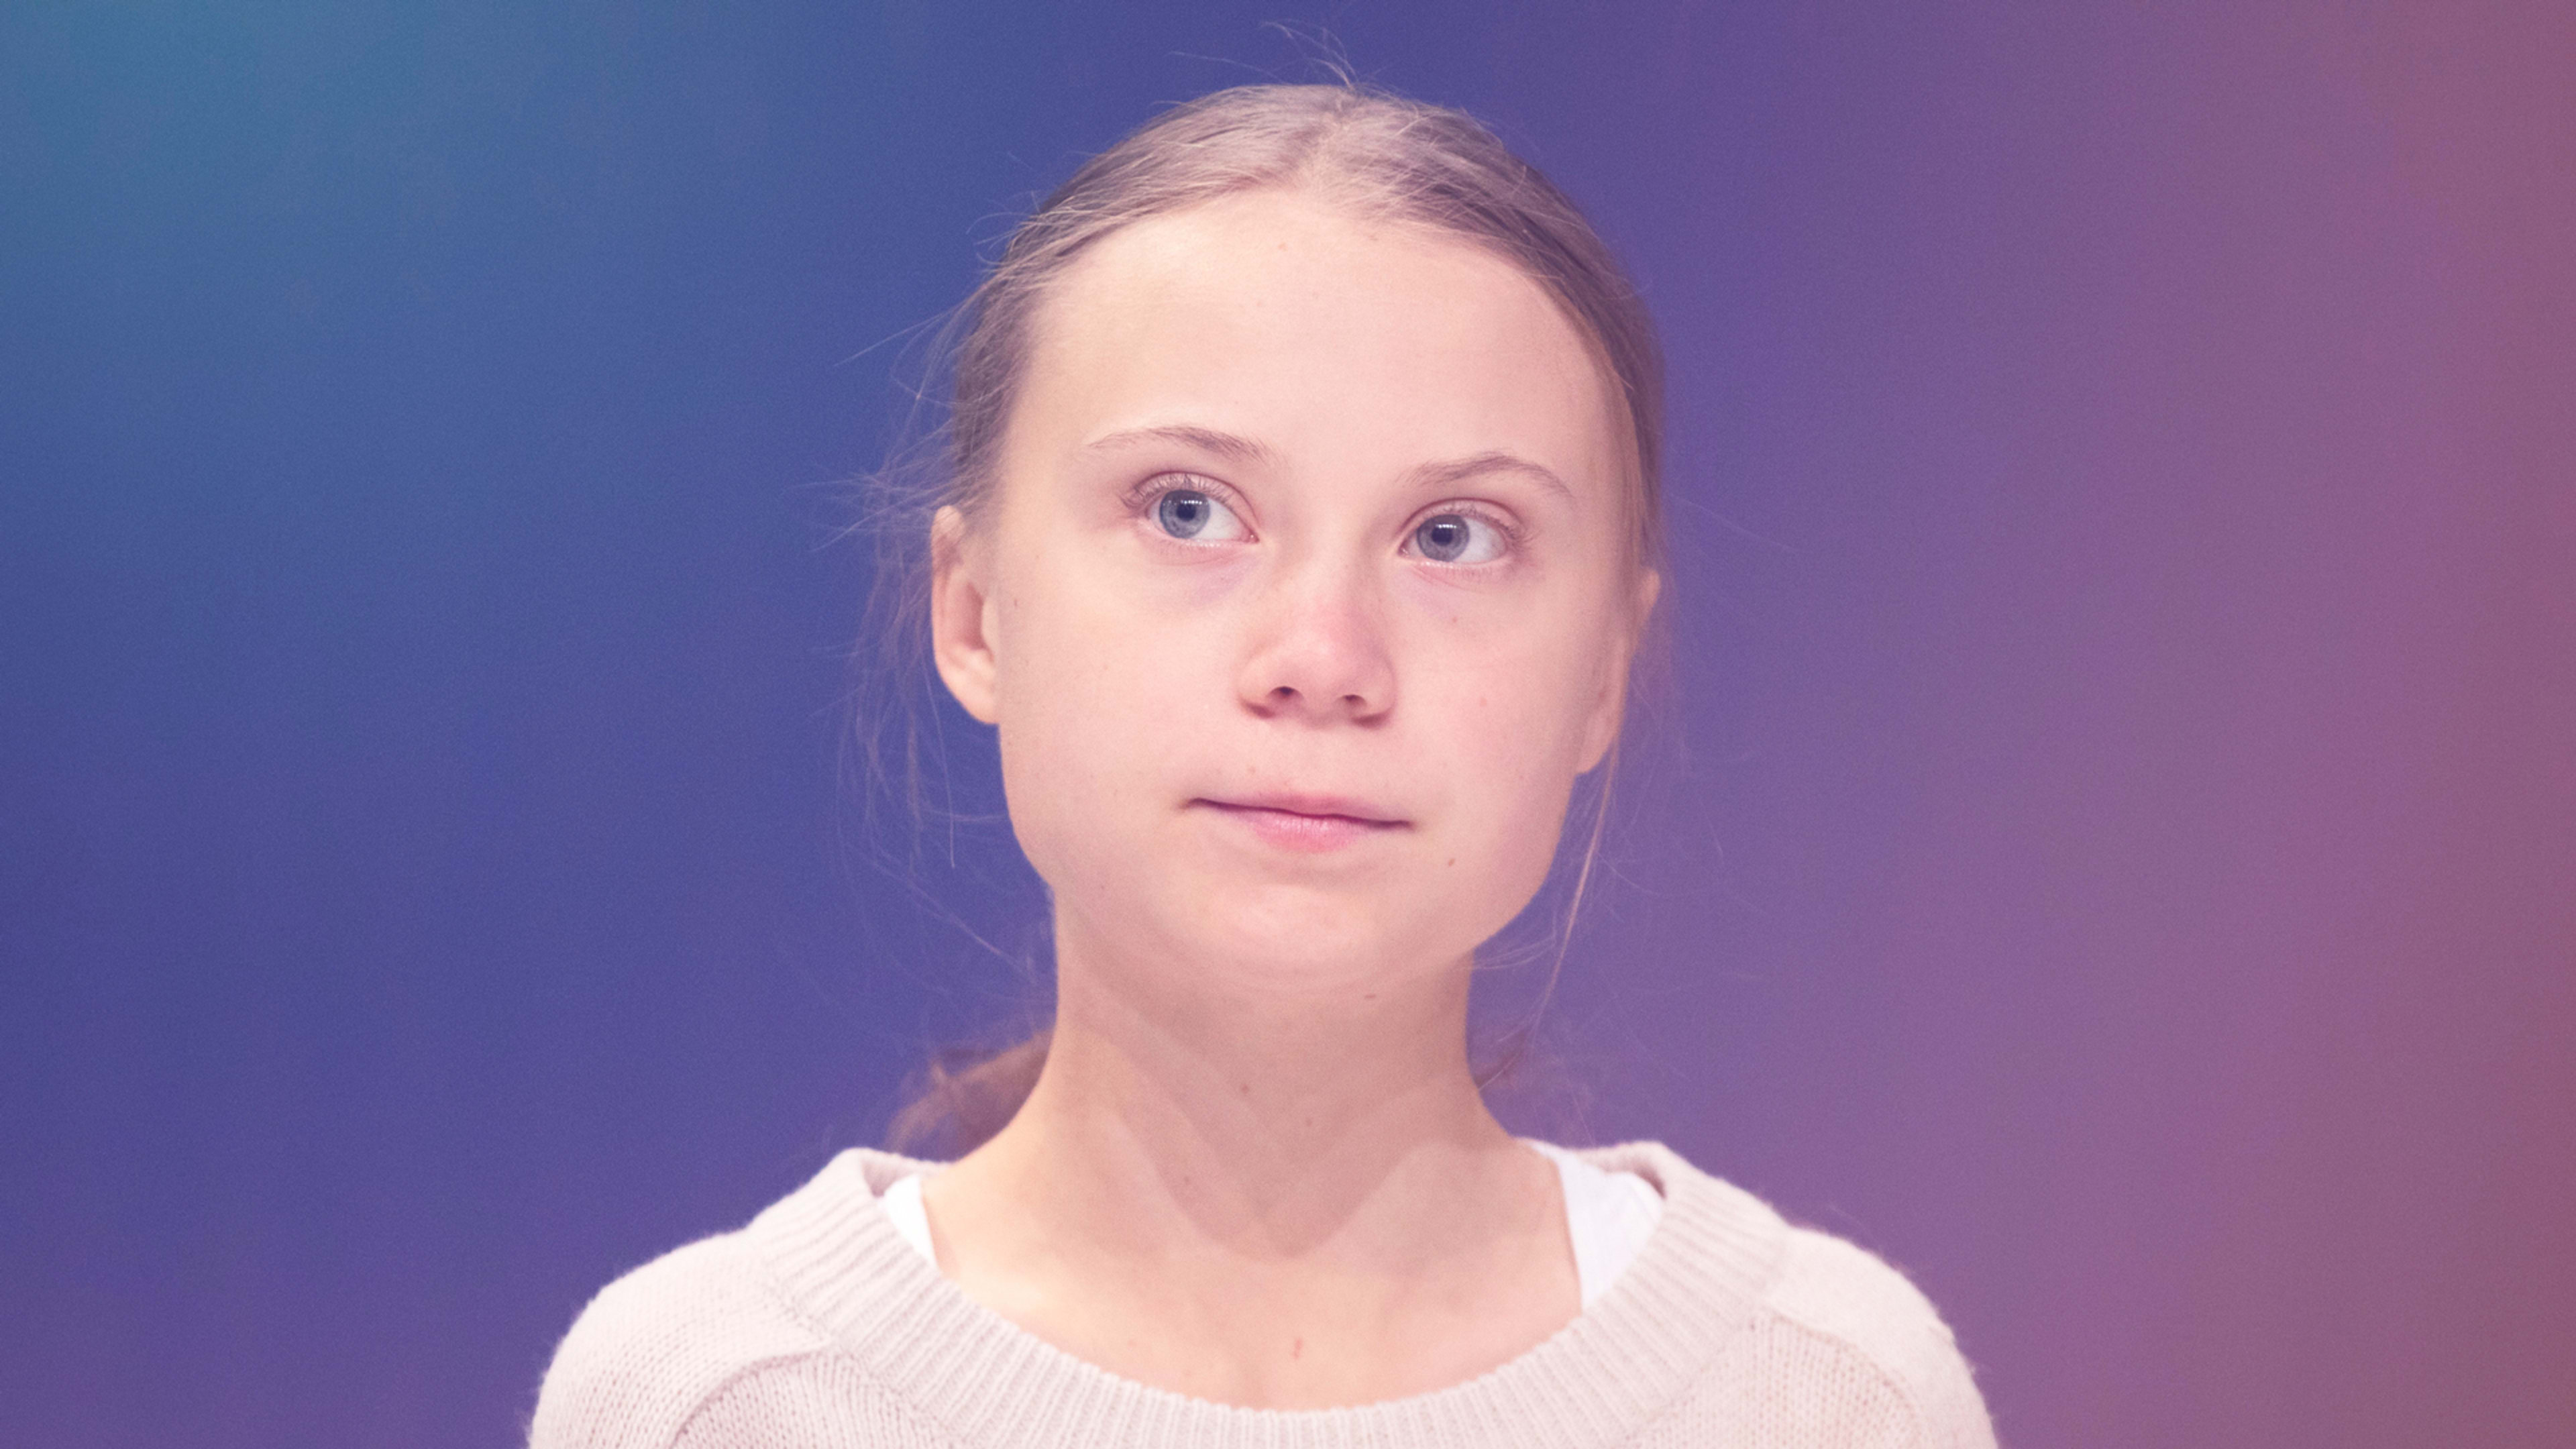 Greta Thunberg was just named ‘Time’ magazine’s 2019 ‘Person of the Year’